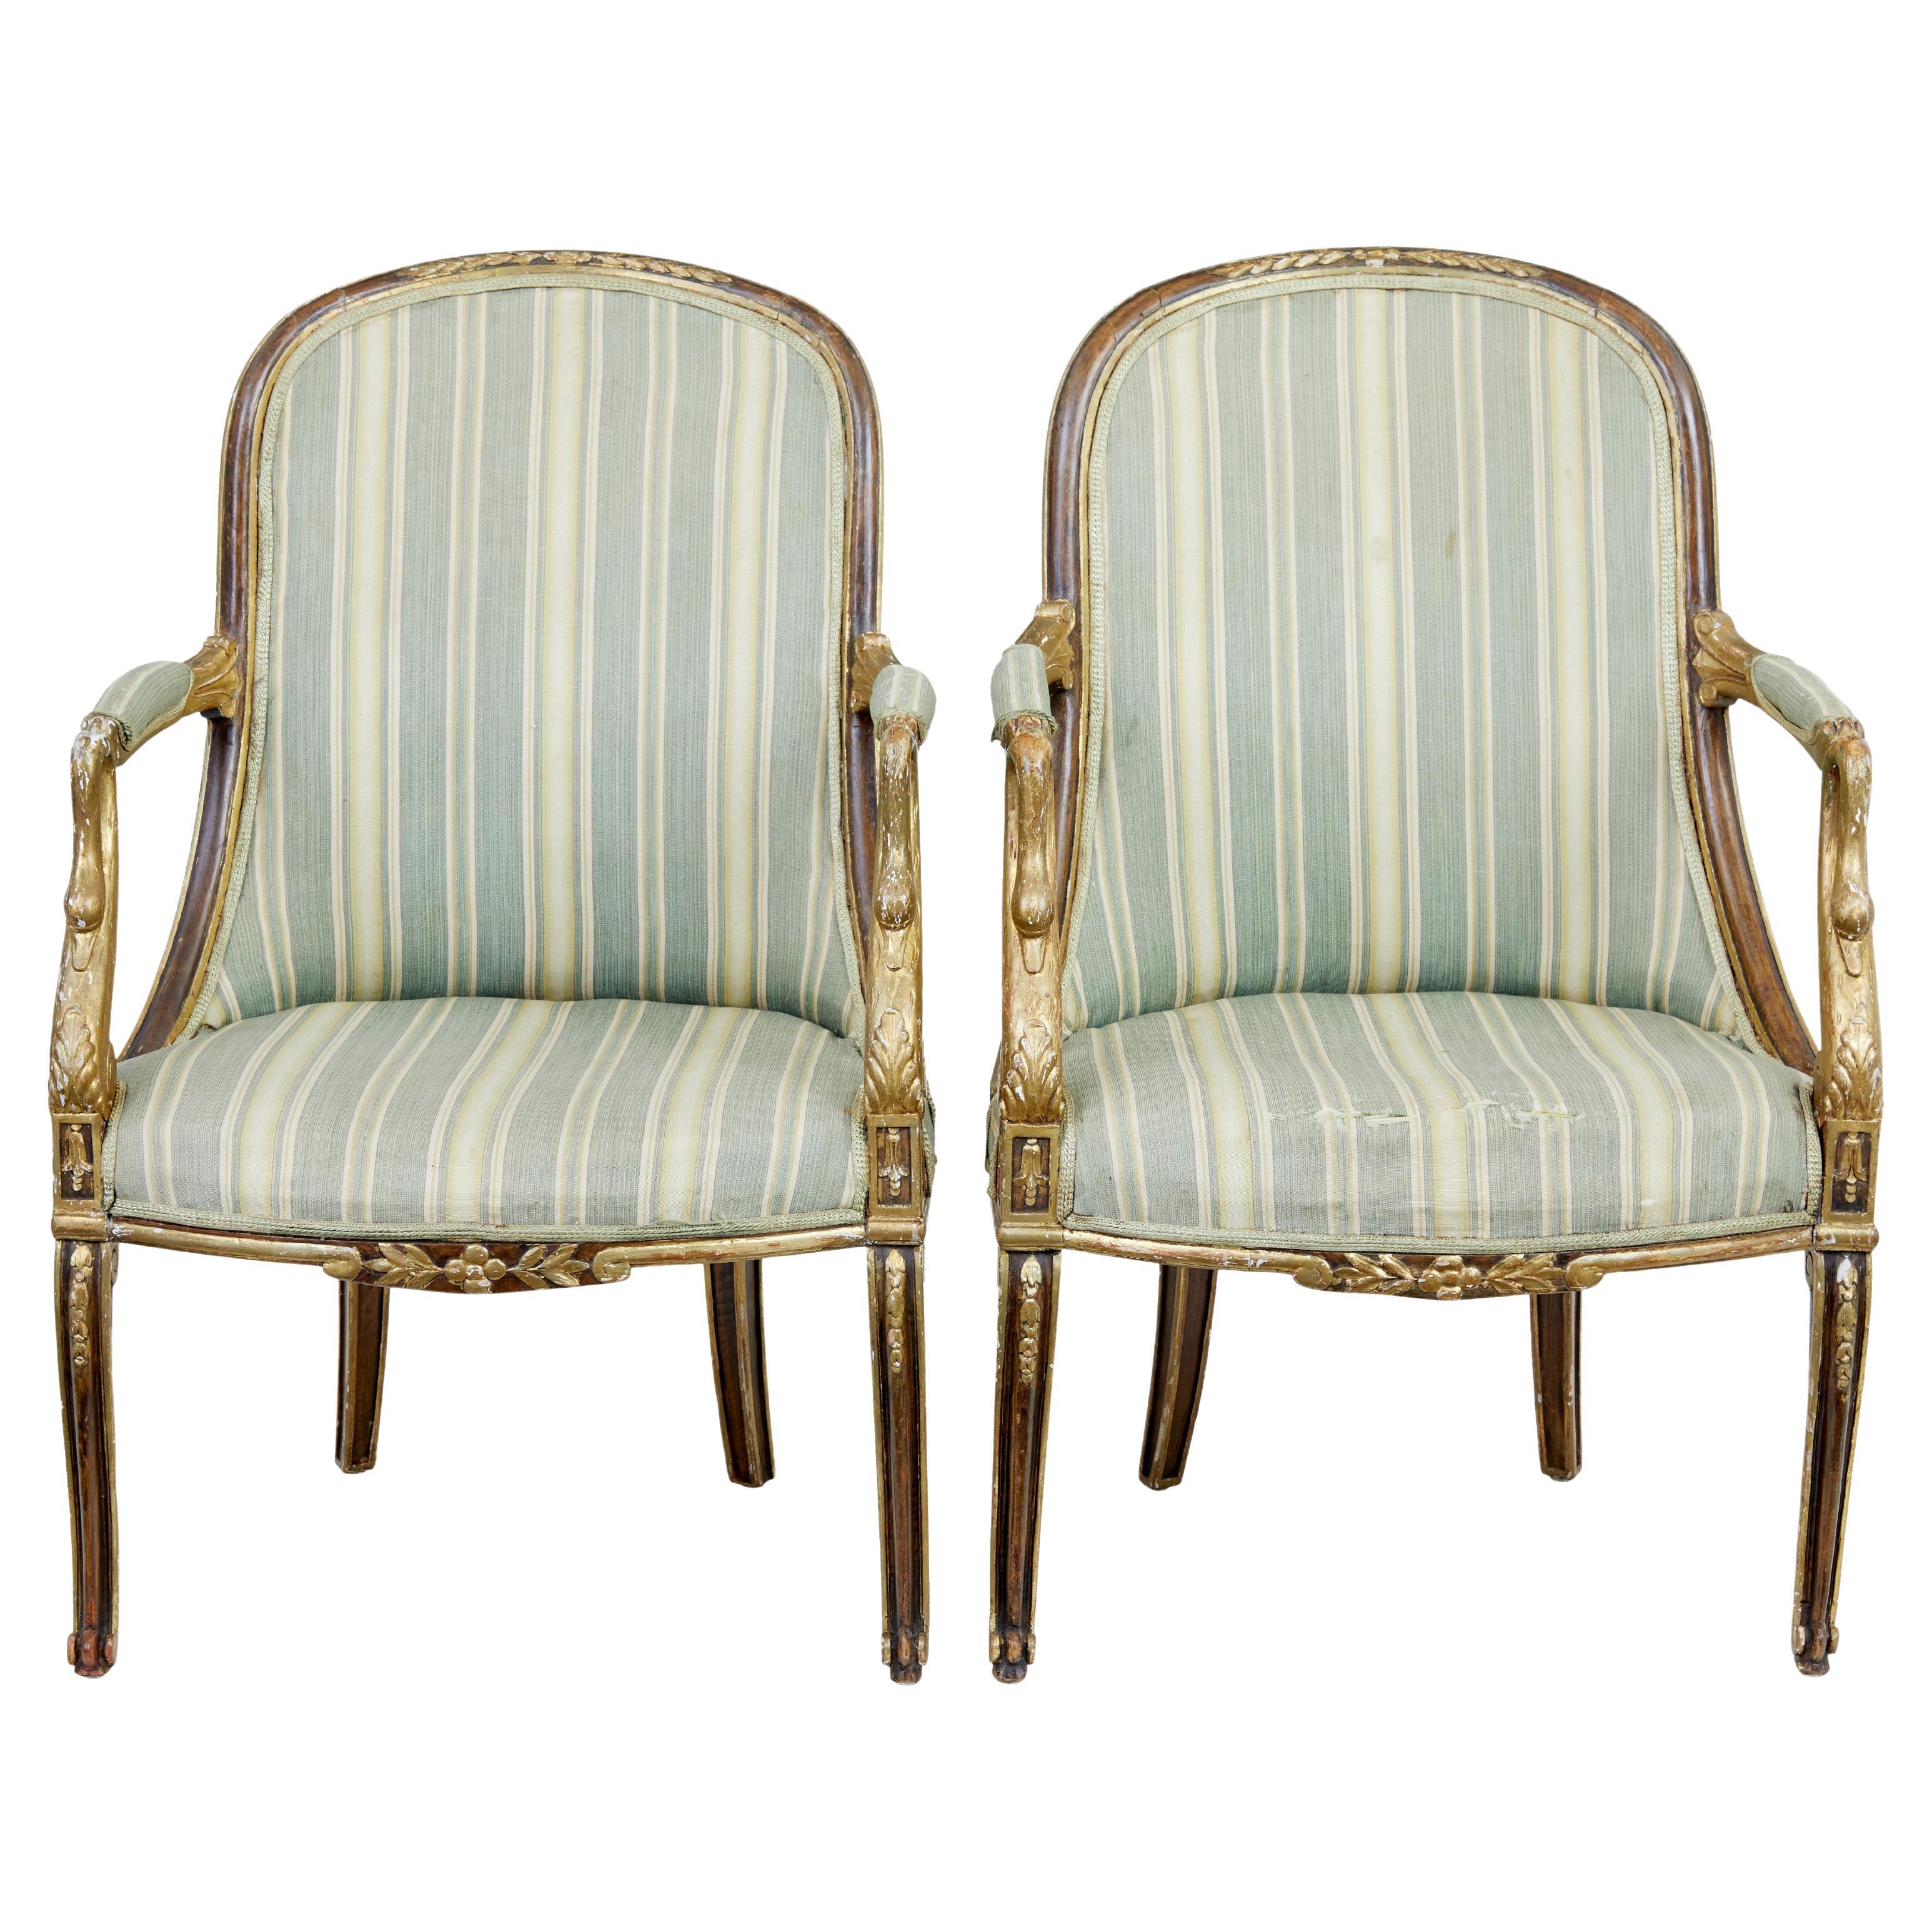 Pair of mid 19th century French walnut and gilt armchairs